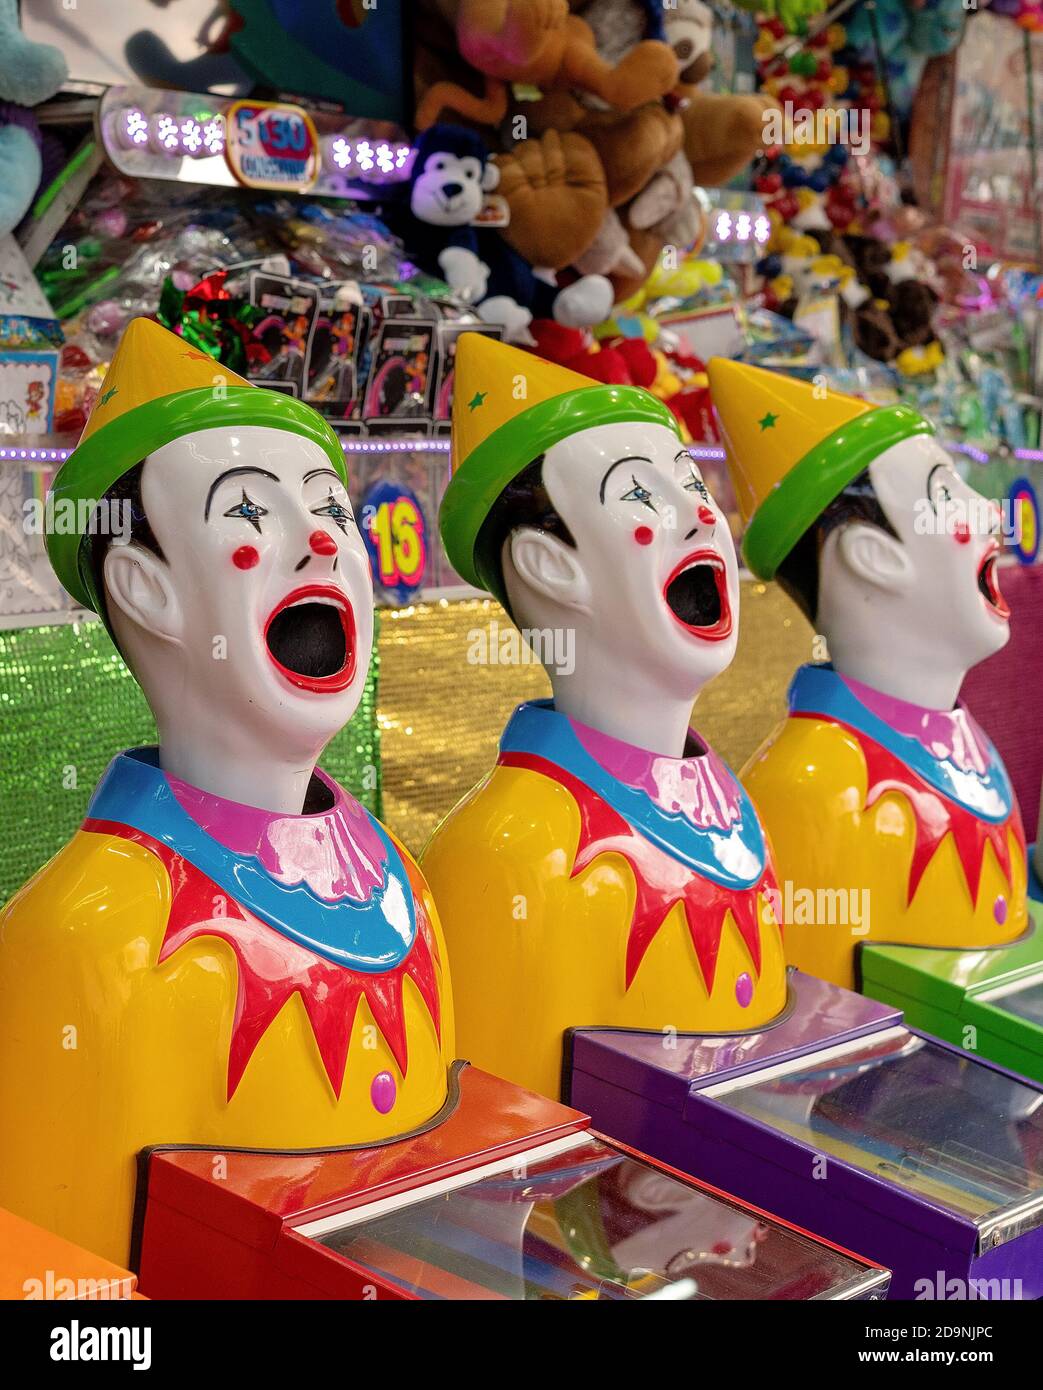 SARINA, QUEENSLAND, AUSTRALIA - AUGUST 2019: Clown game on sideshow alley at Sarina local country show Stock Photo